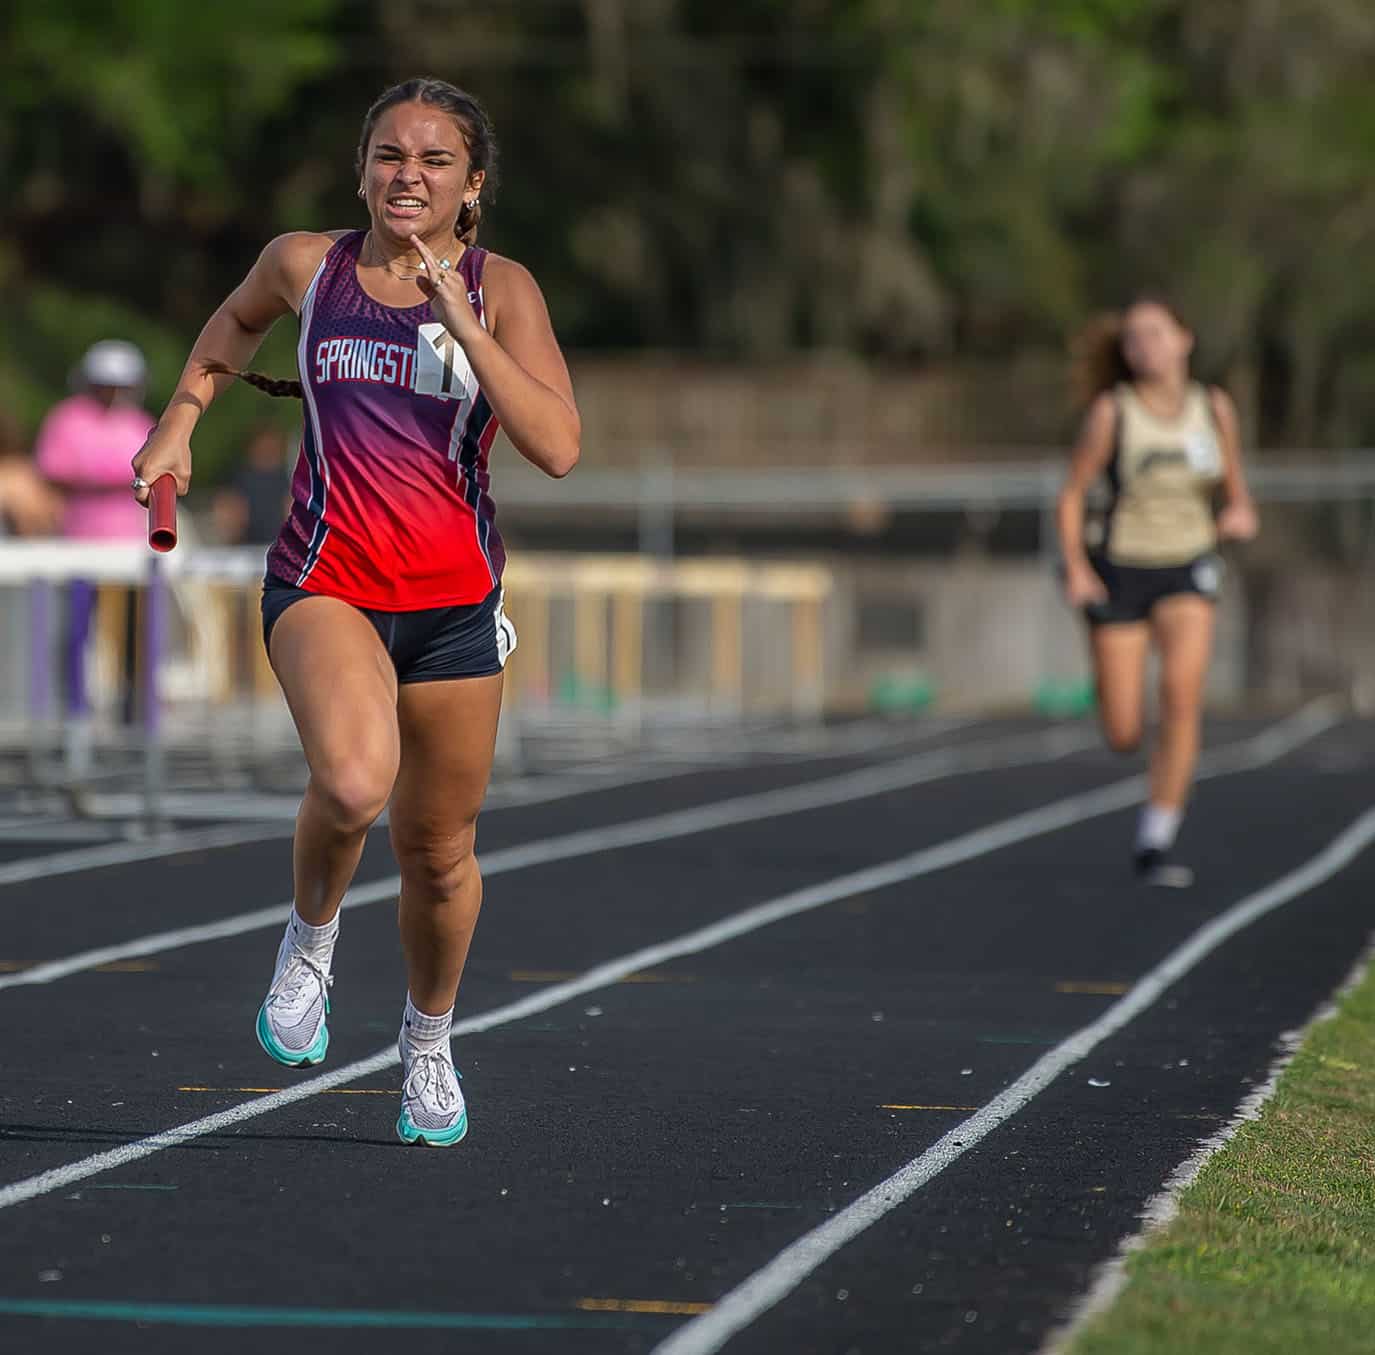 Springstead High’s Frances Martins brings home the anchor leg of the 4x800 relay in the Kiwanis Invitational at Hernando High. Photo by JOE DiCRISTOFALO